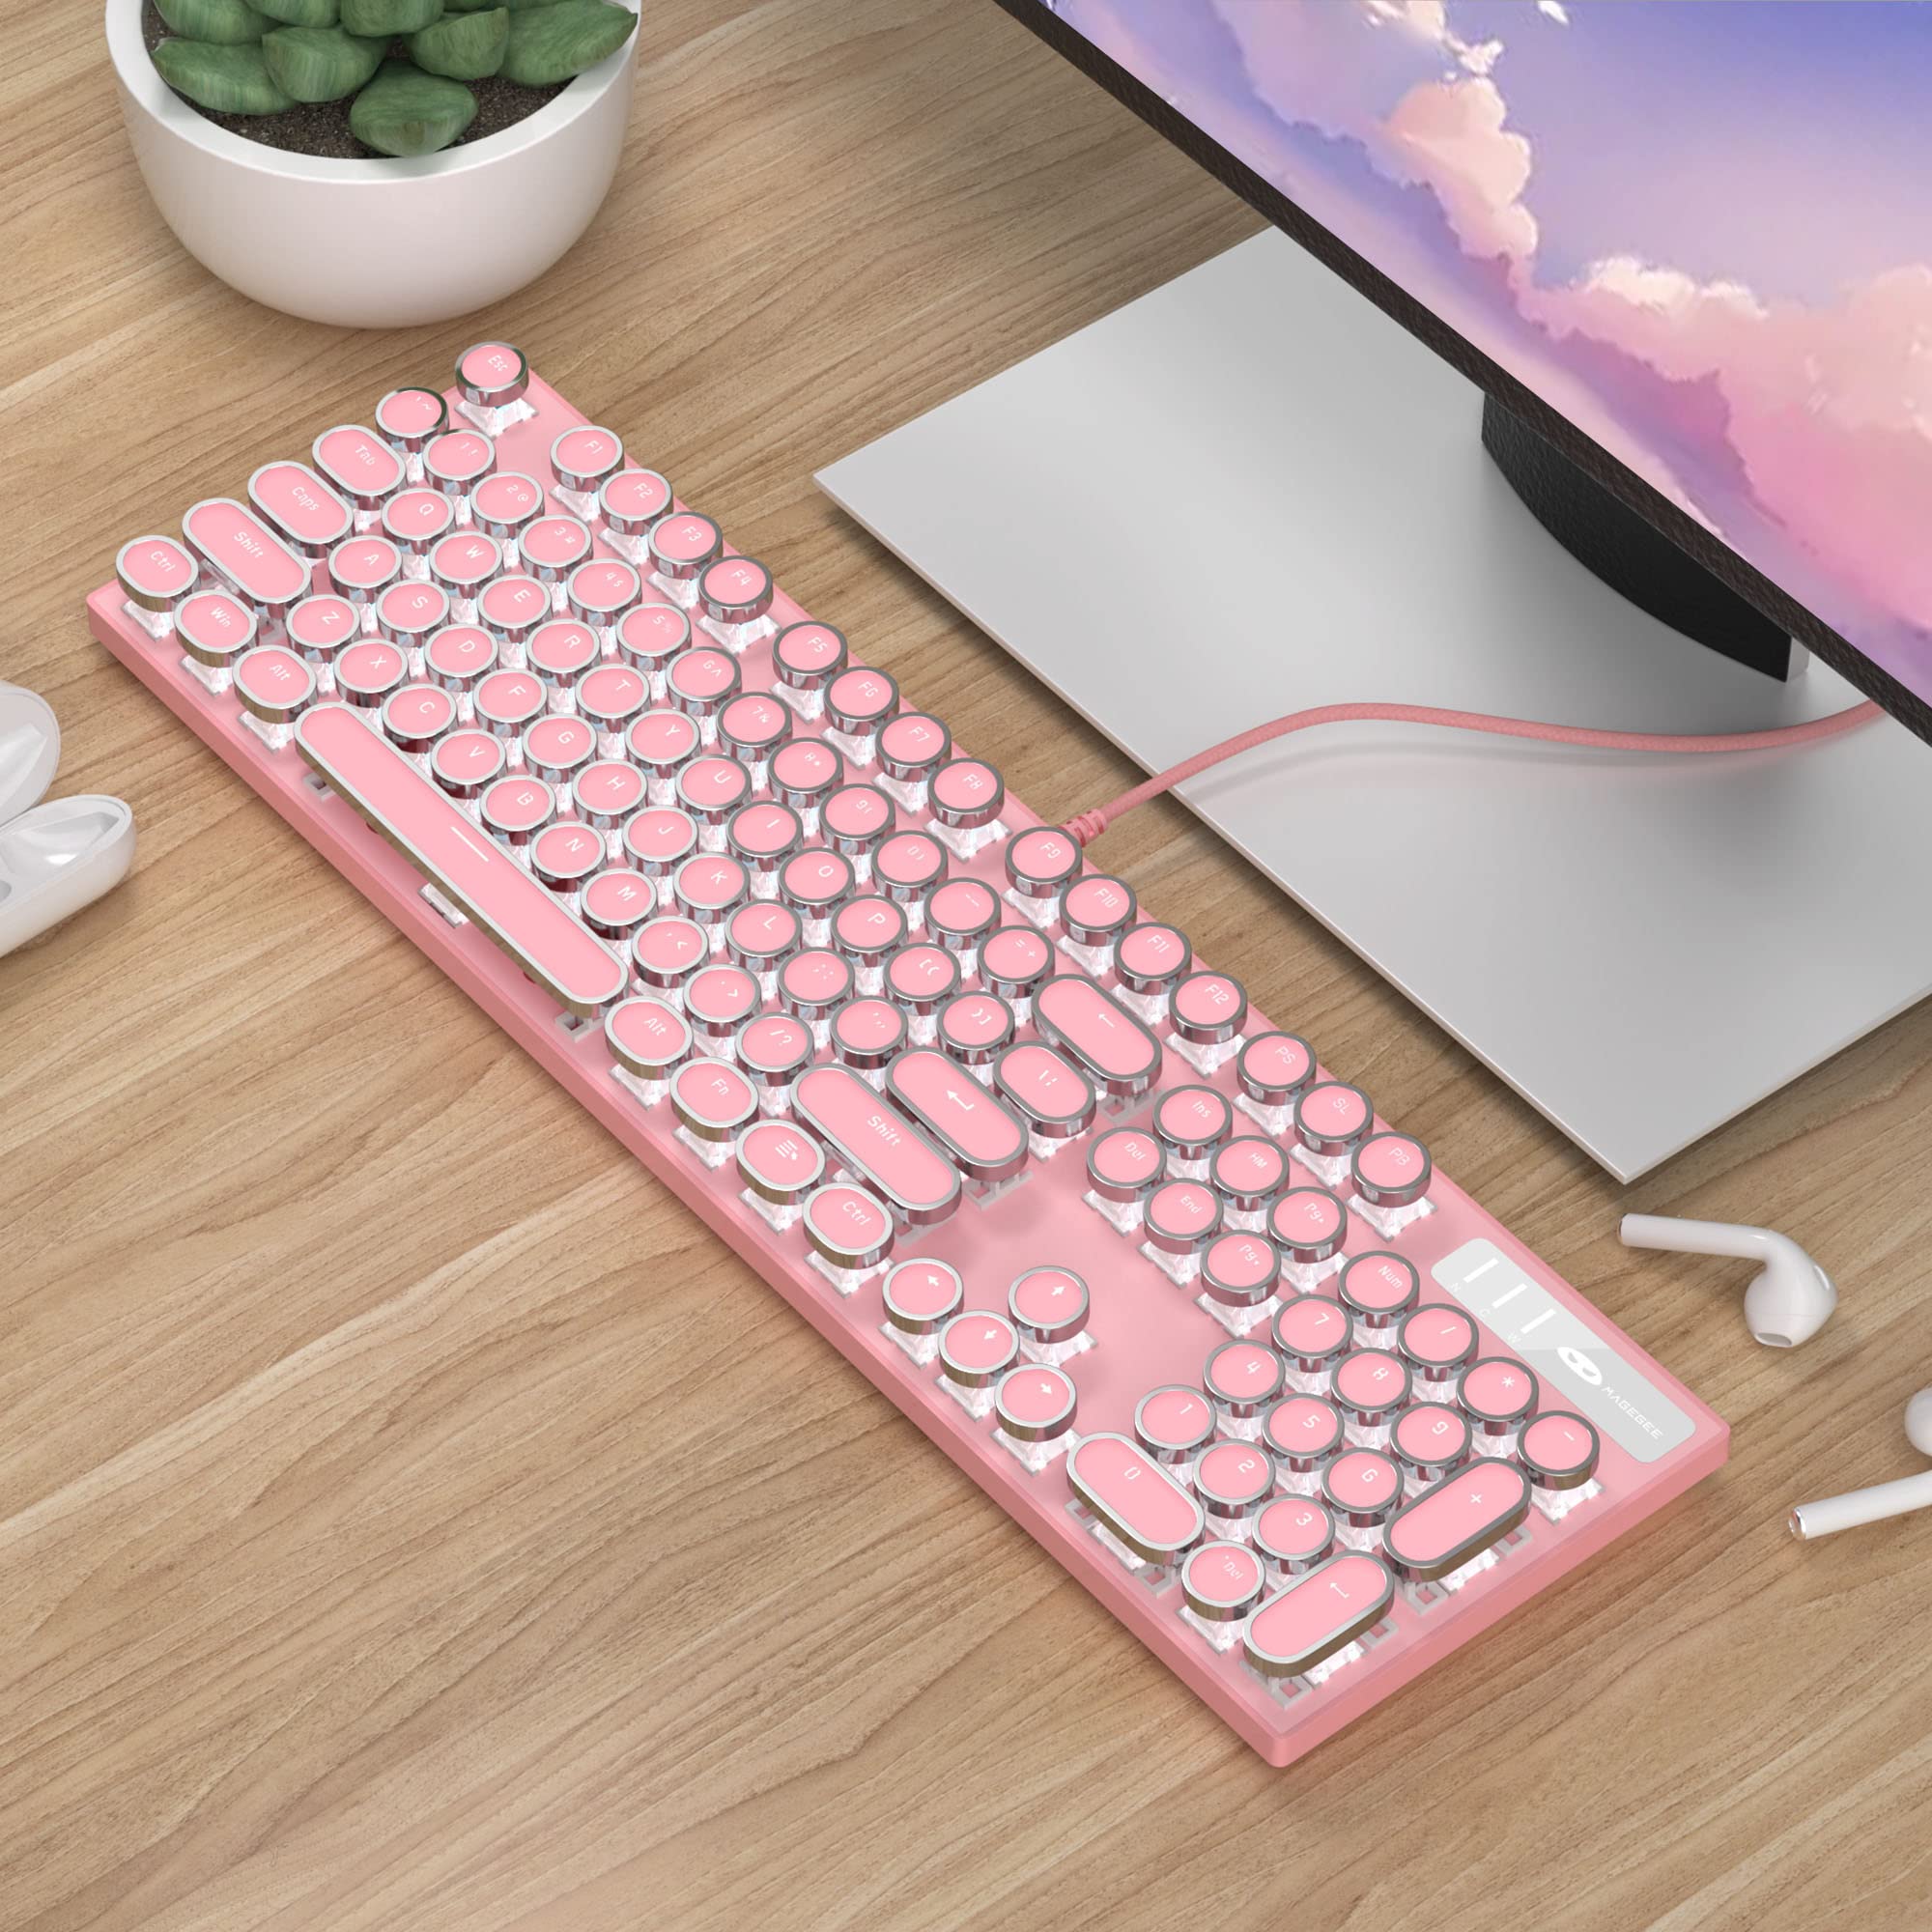 Typewriter Mechanical Gaming Keyboard and Mouse Combo, Retro Punk Round Keycaps White LED Backlit USB Wired Computer Keyboard for Game and Office, for Windows Laptop PC, Red Switches(Pink)